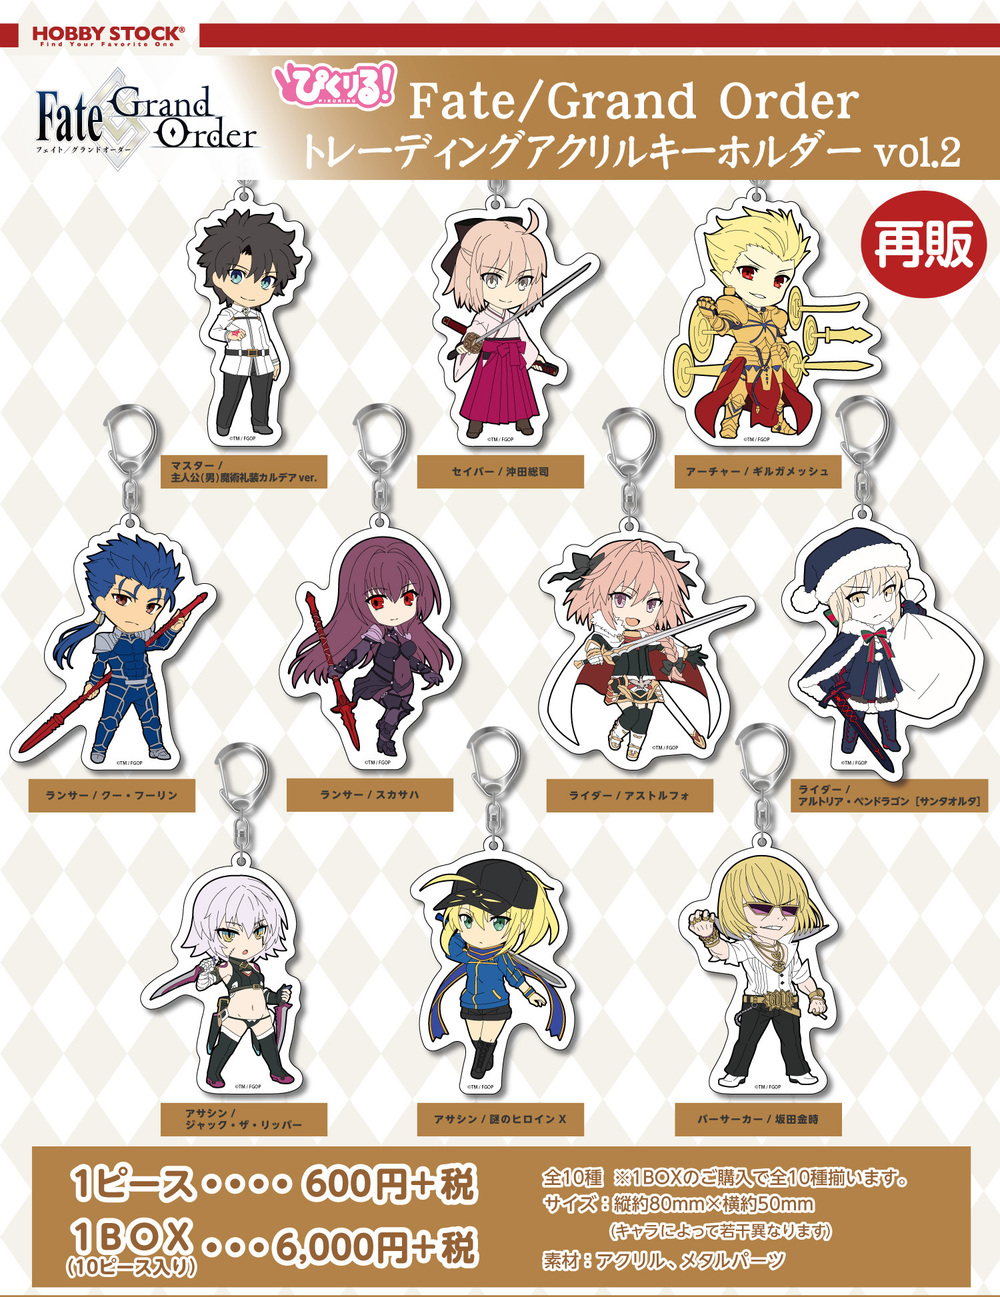 Pikuriru Fate Grand Order Trading Acrylic Key Chain Vol 2 Set Of 10 Pieces ぴくりる Fate Grand Order トレーディングアクリルキーホルダー Vol 2 Anime Goods Candy Toys Trading Figures Key Holders